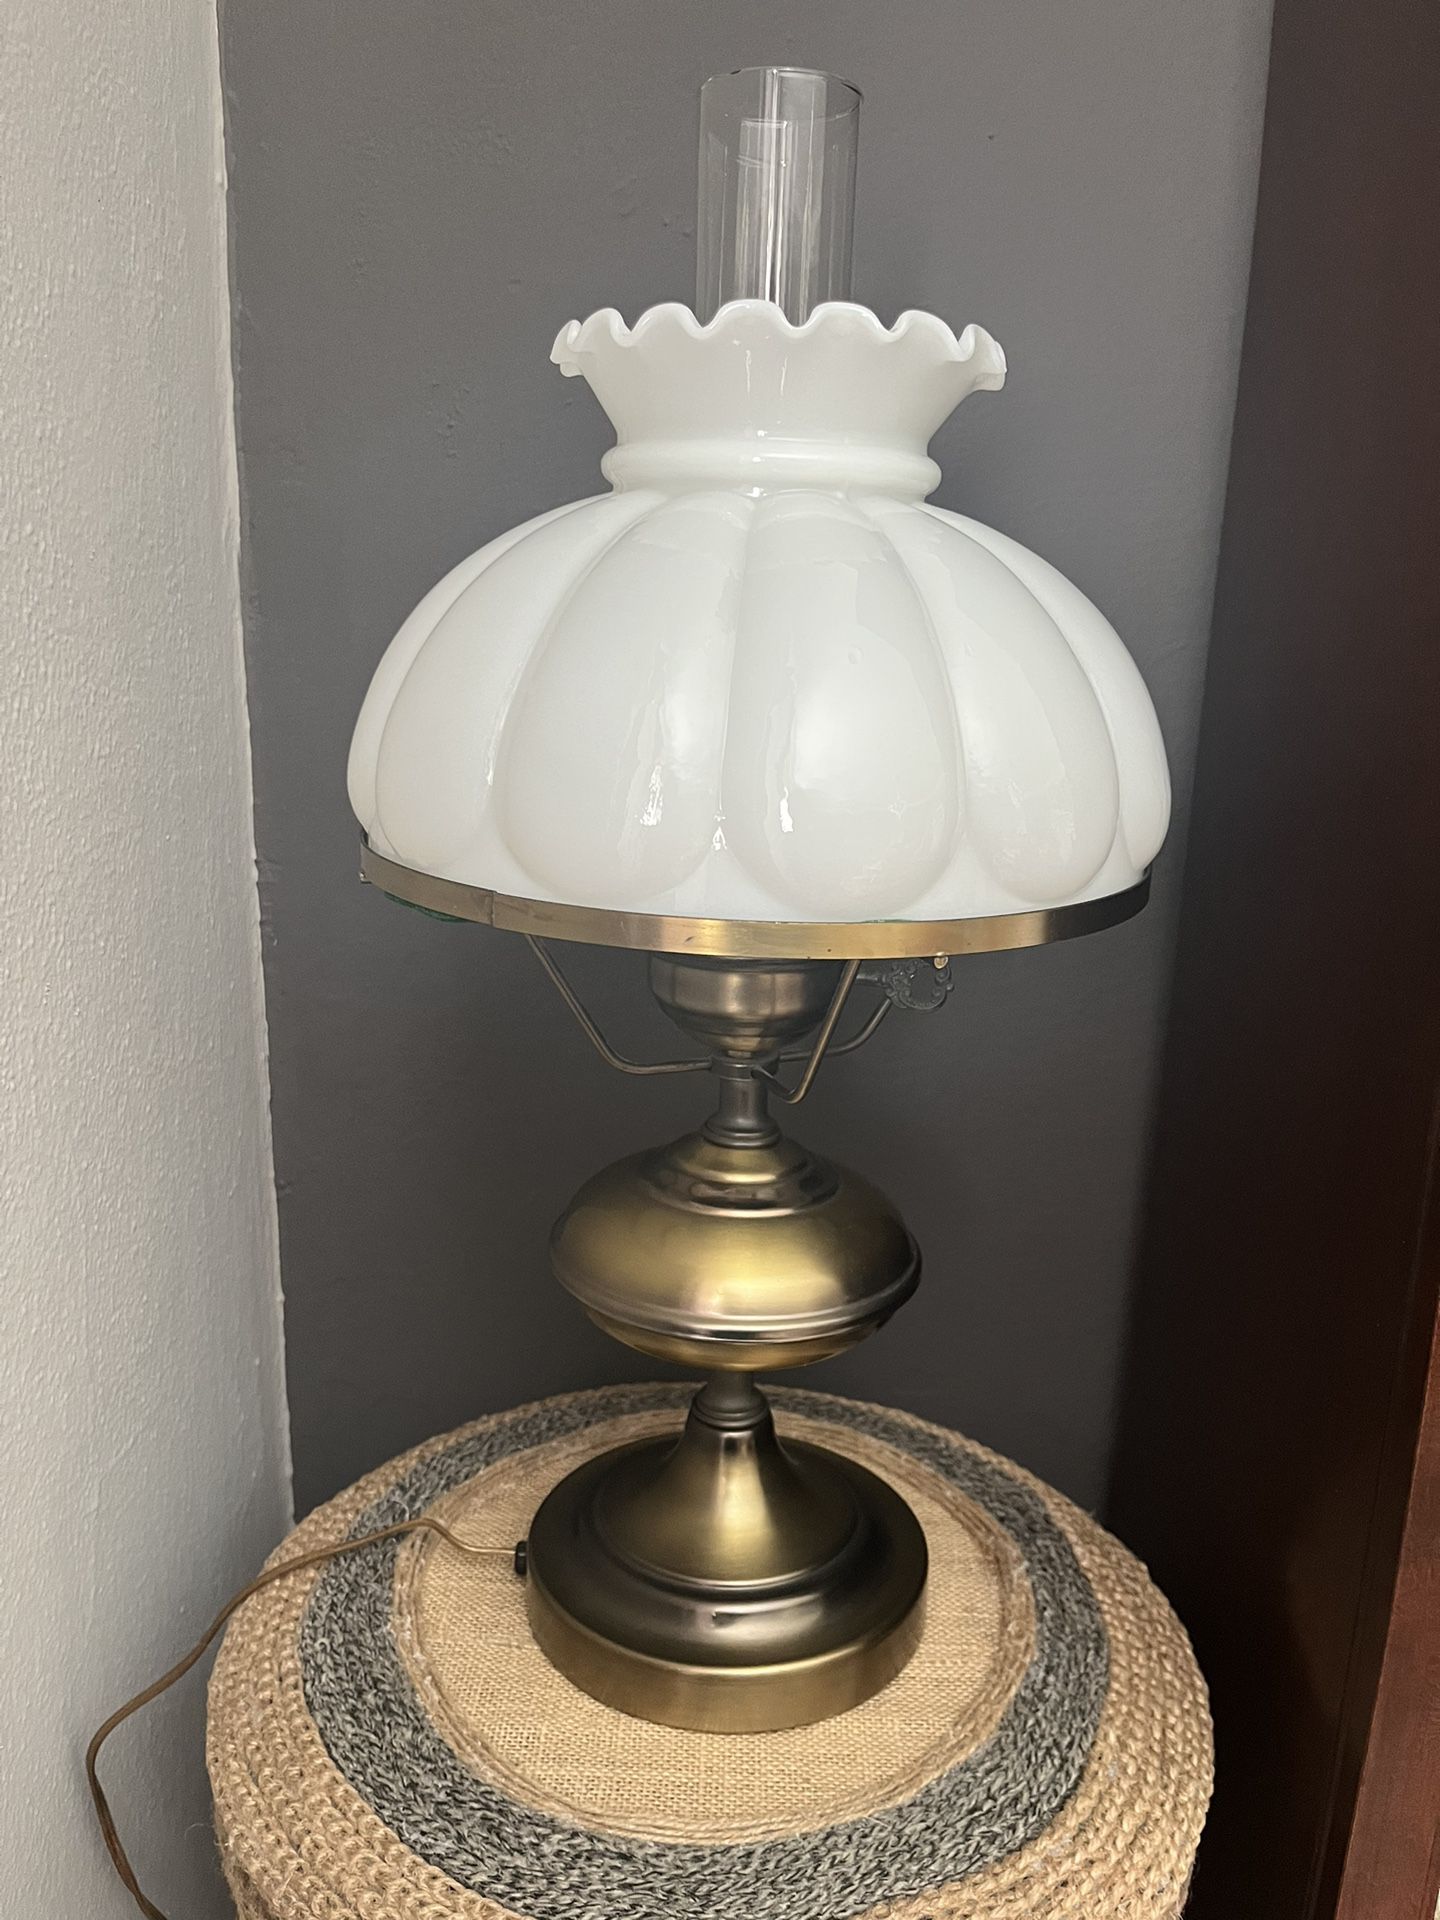 Vintage metal lamp with antique brushed brass-tone finish